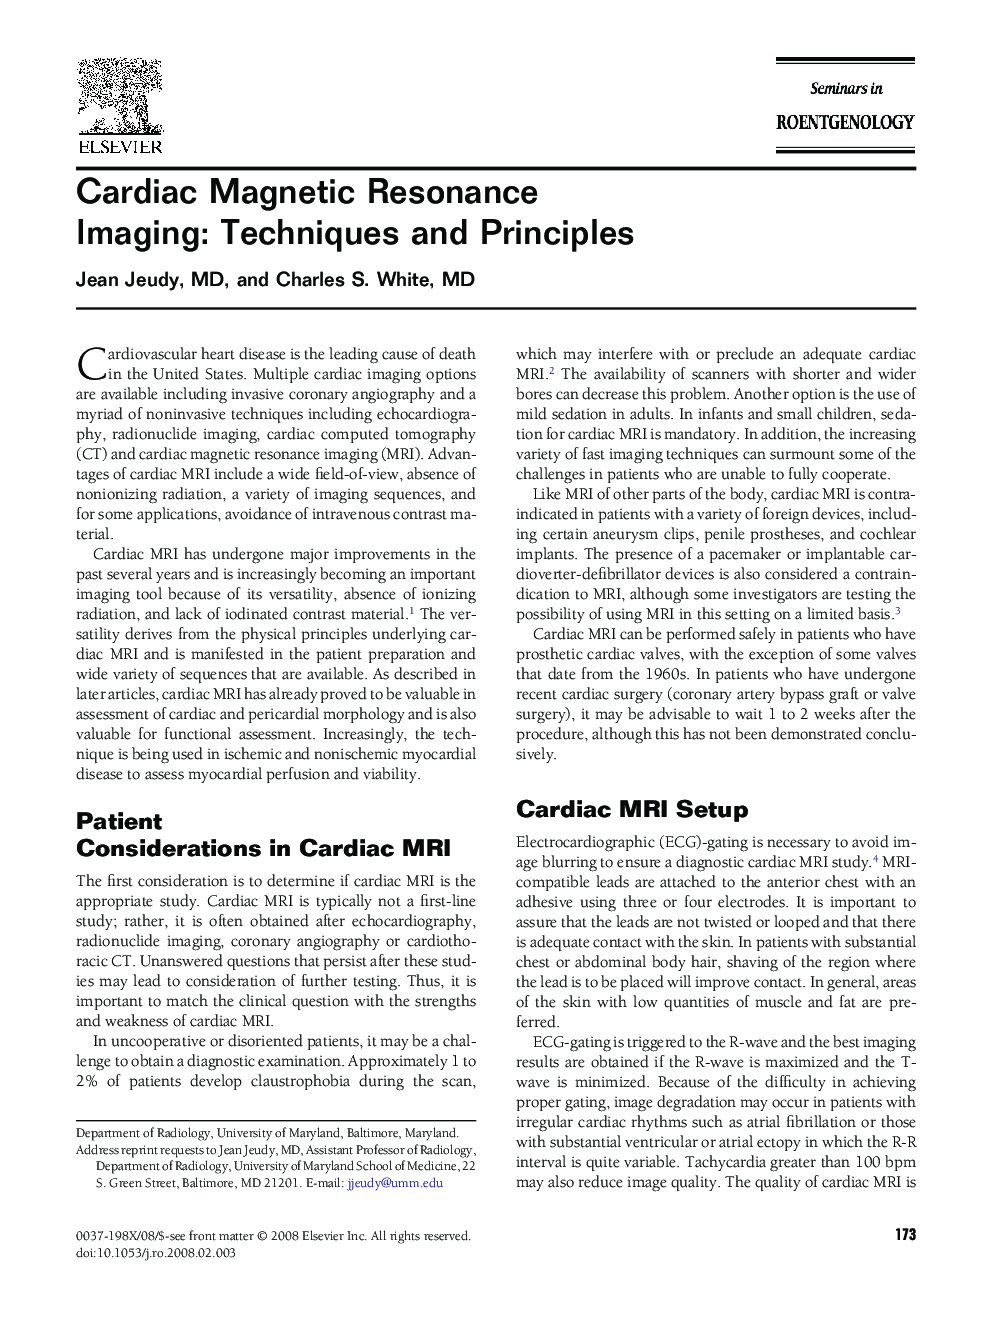 Cardiac Magnetic Resonance Imaging: Techniques and Principles